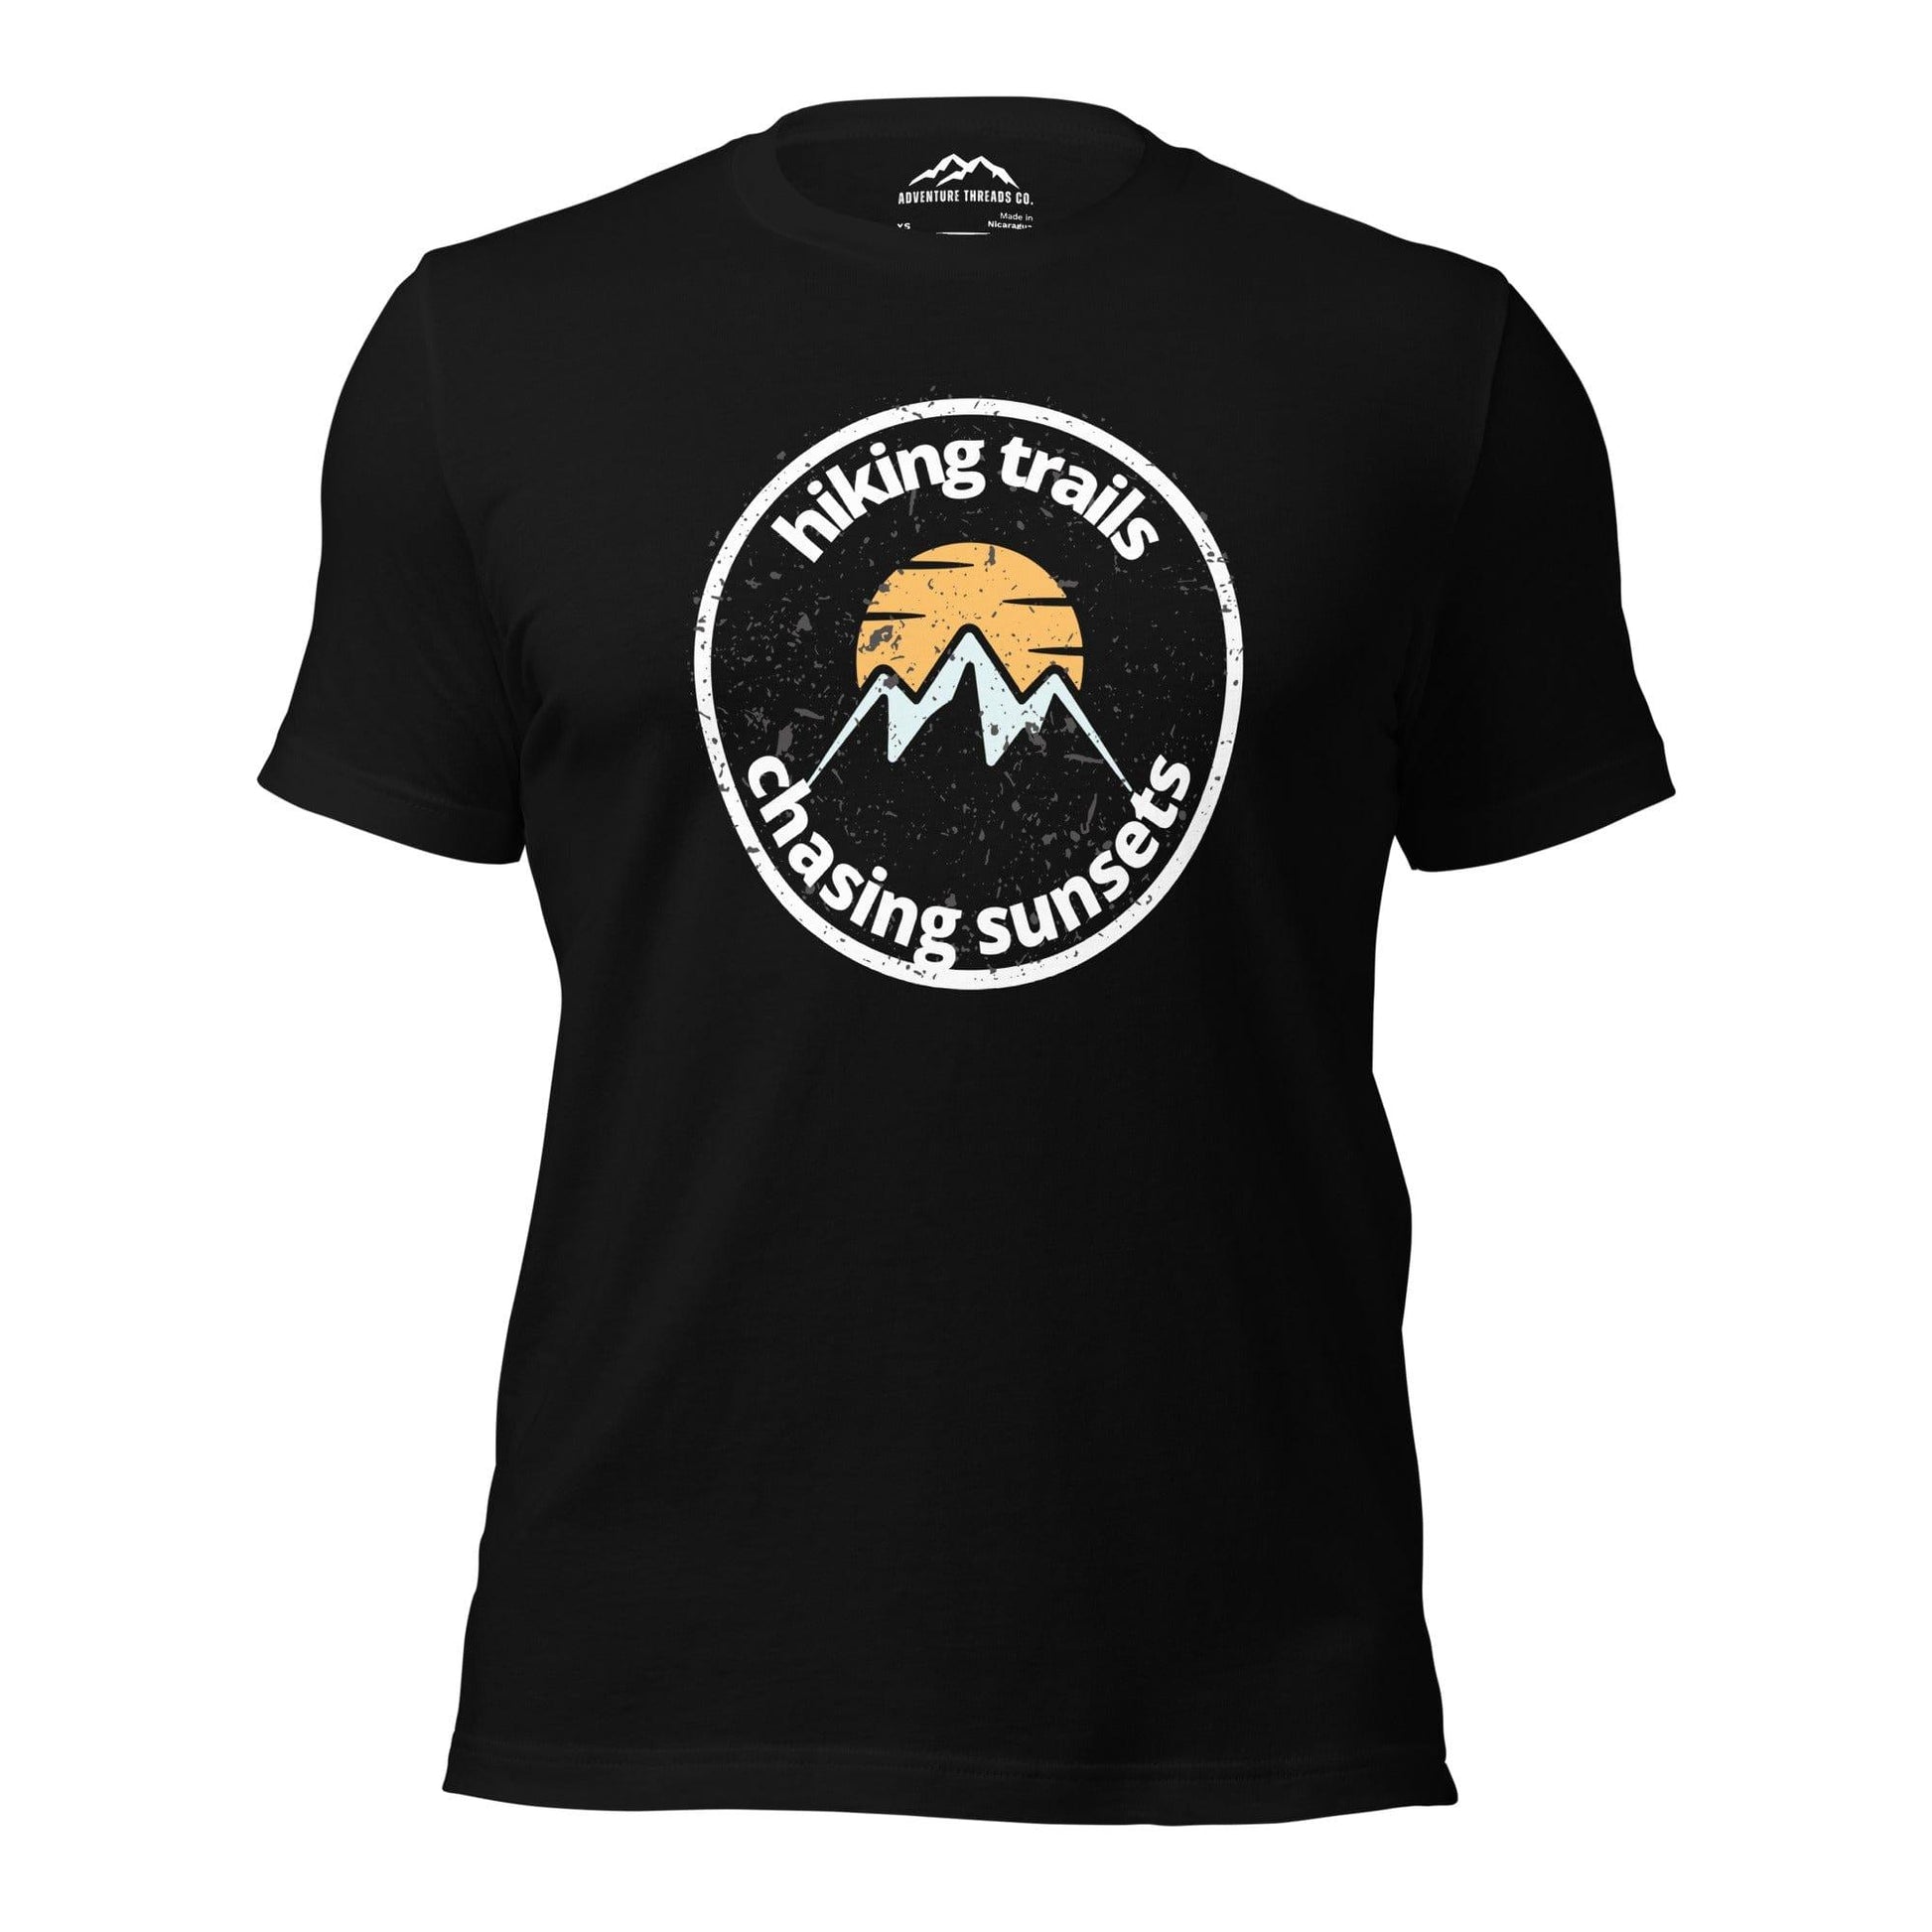 Hiking & Chasing Sunsets T-Shirt - Adventure Threads Company